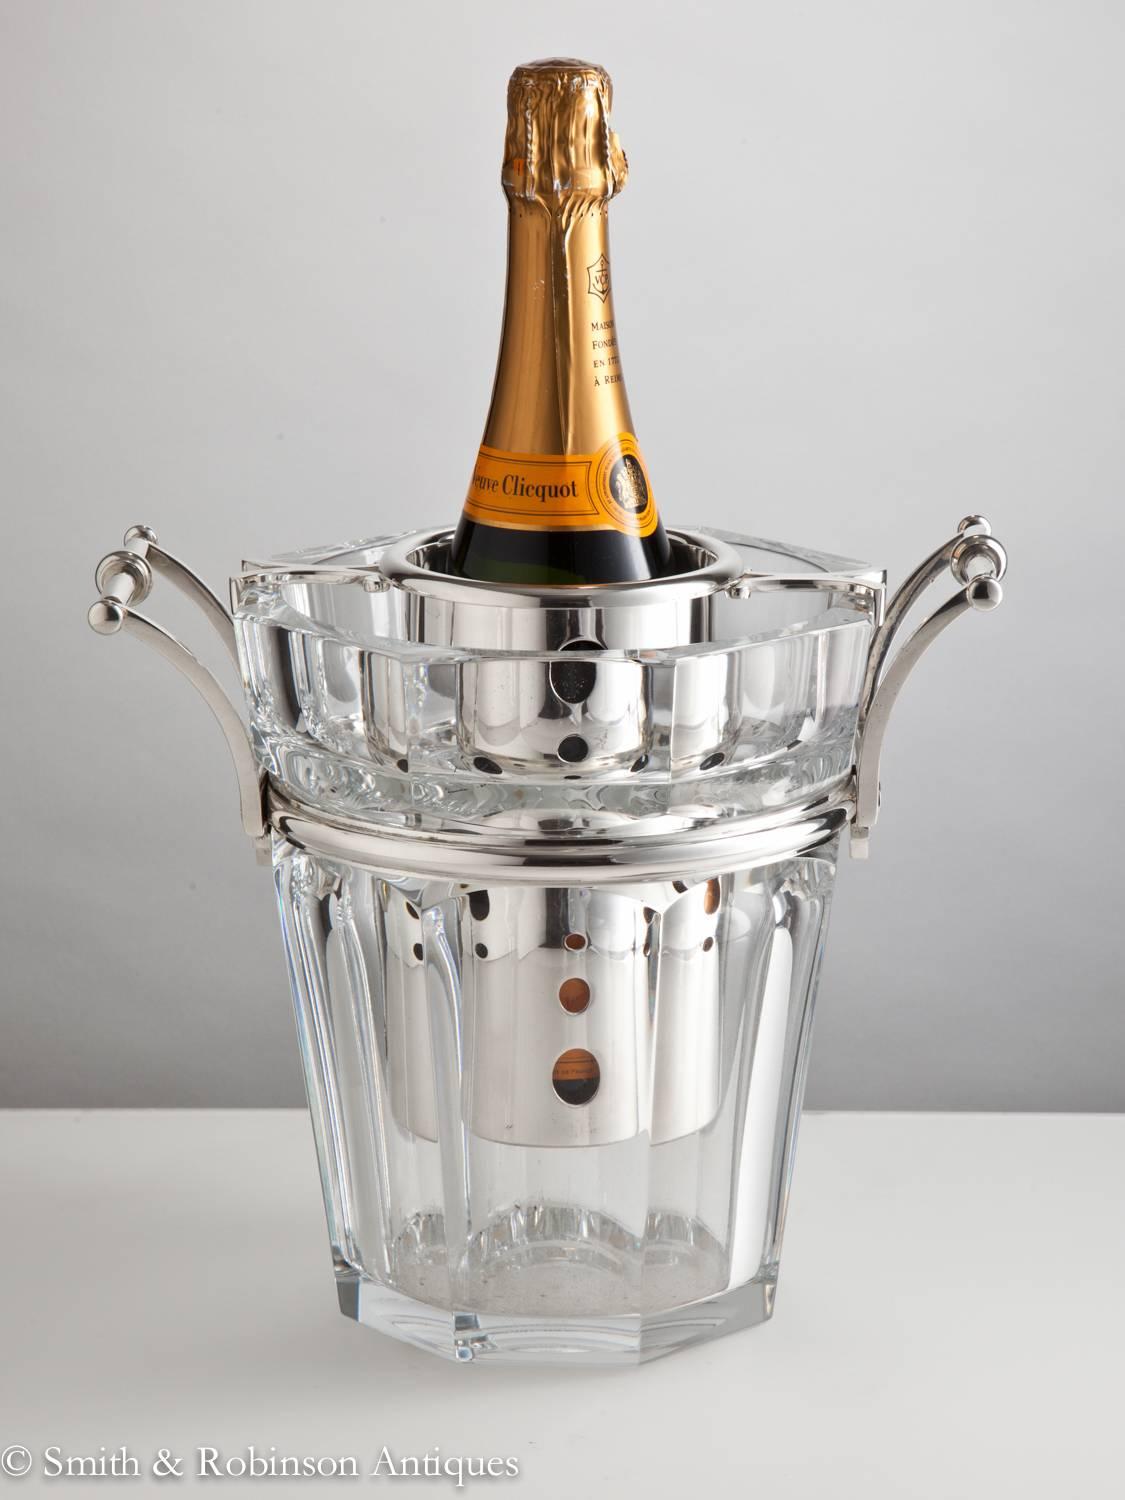 Time for a celebration!
A very impressive centrepiece Baccarat champagne cooler.
The quality of the thick glass body and metal work is stunning. It is in perfect condition and complete with all original components as shown.
Makers mark stamped on